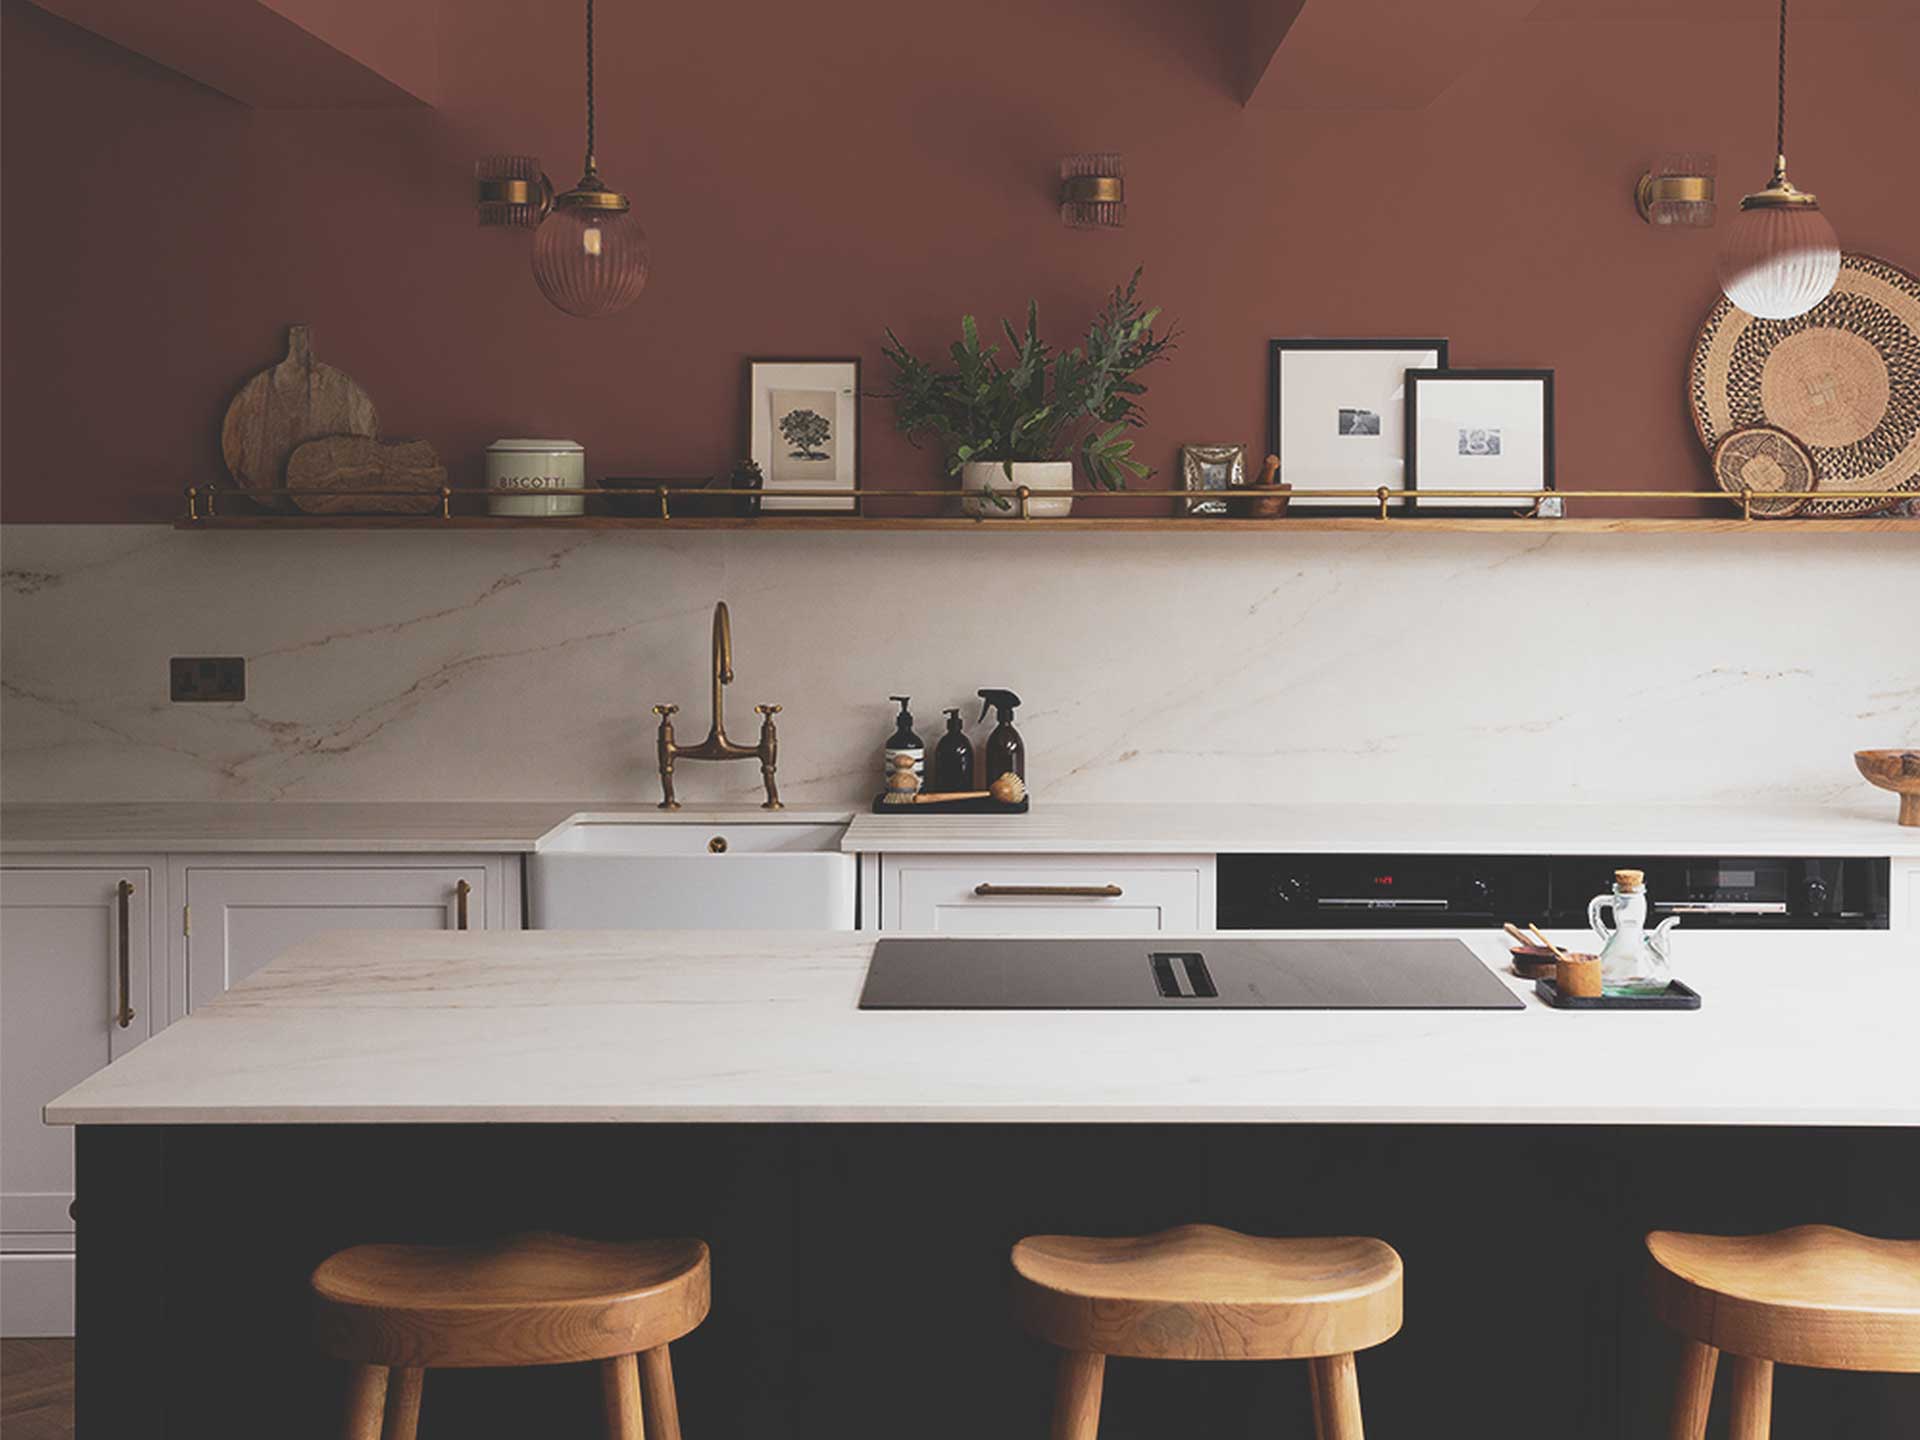 Use sustainable paint in your kitchen to let the walls breathe